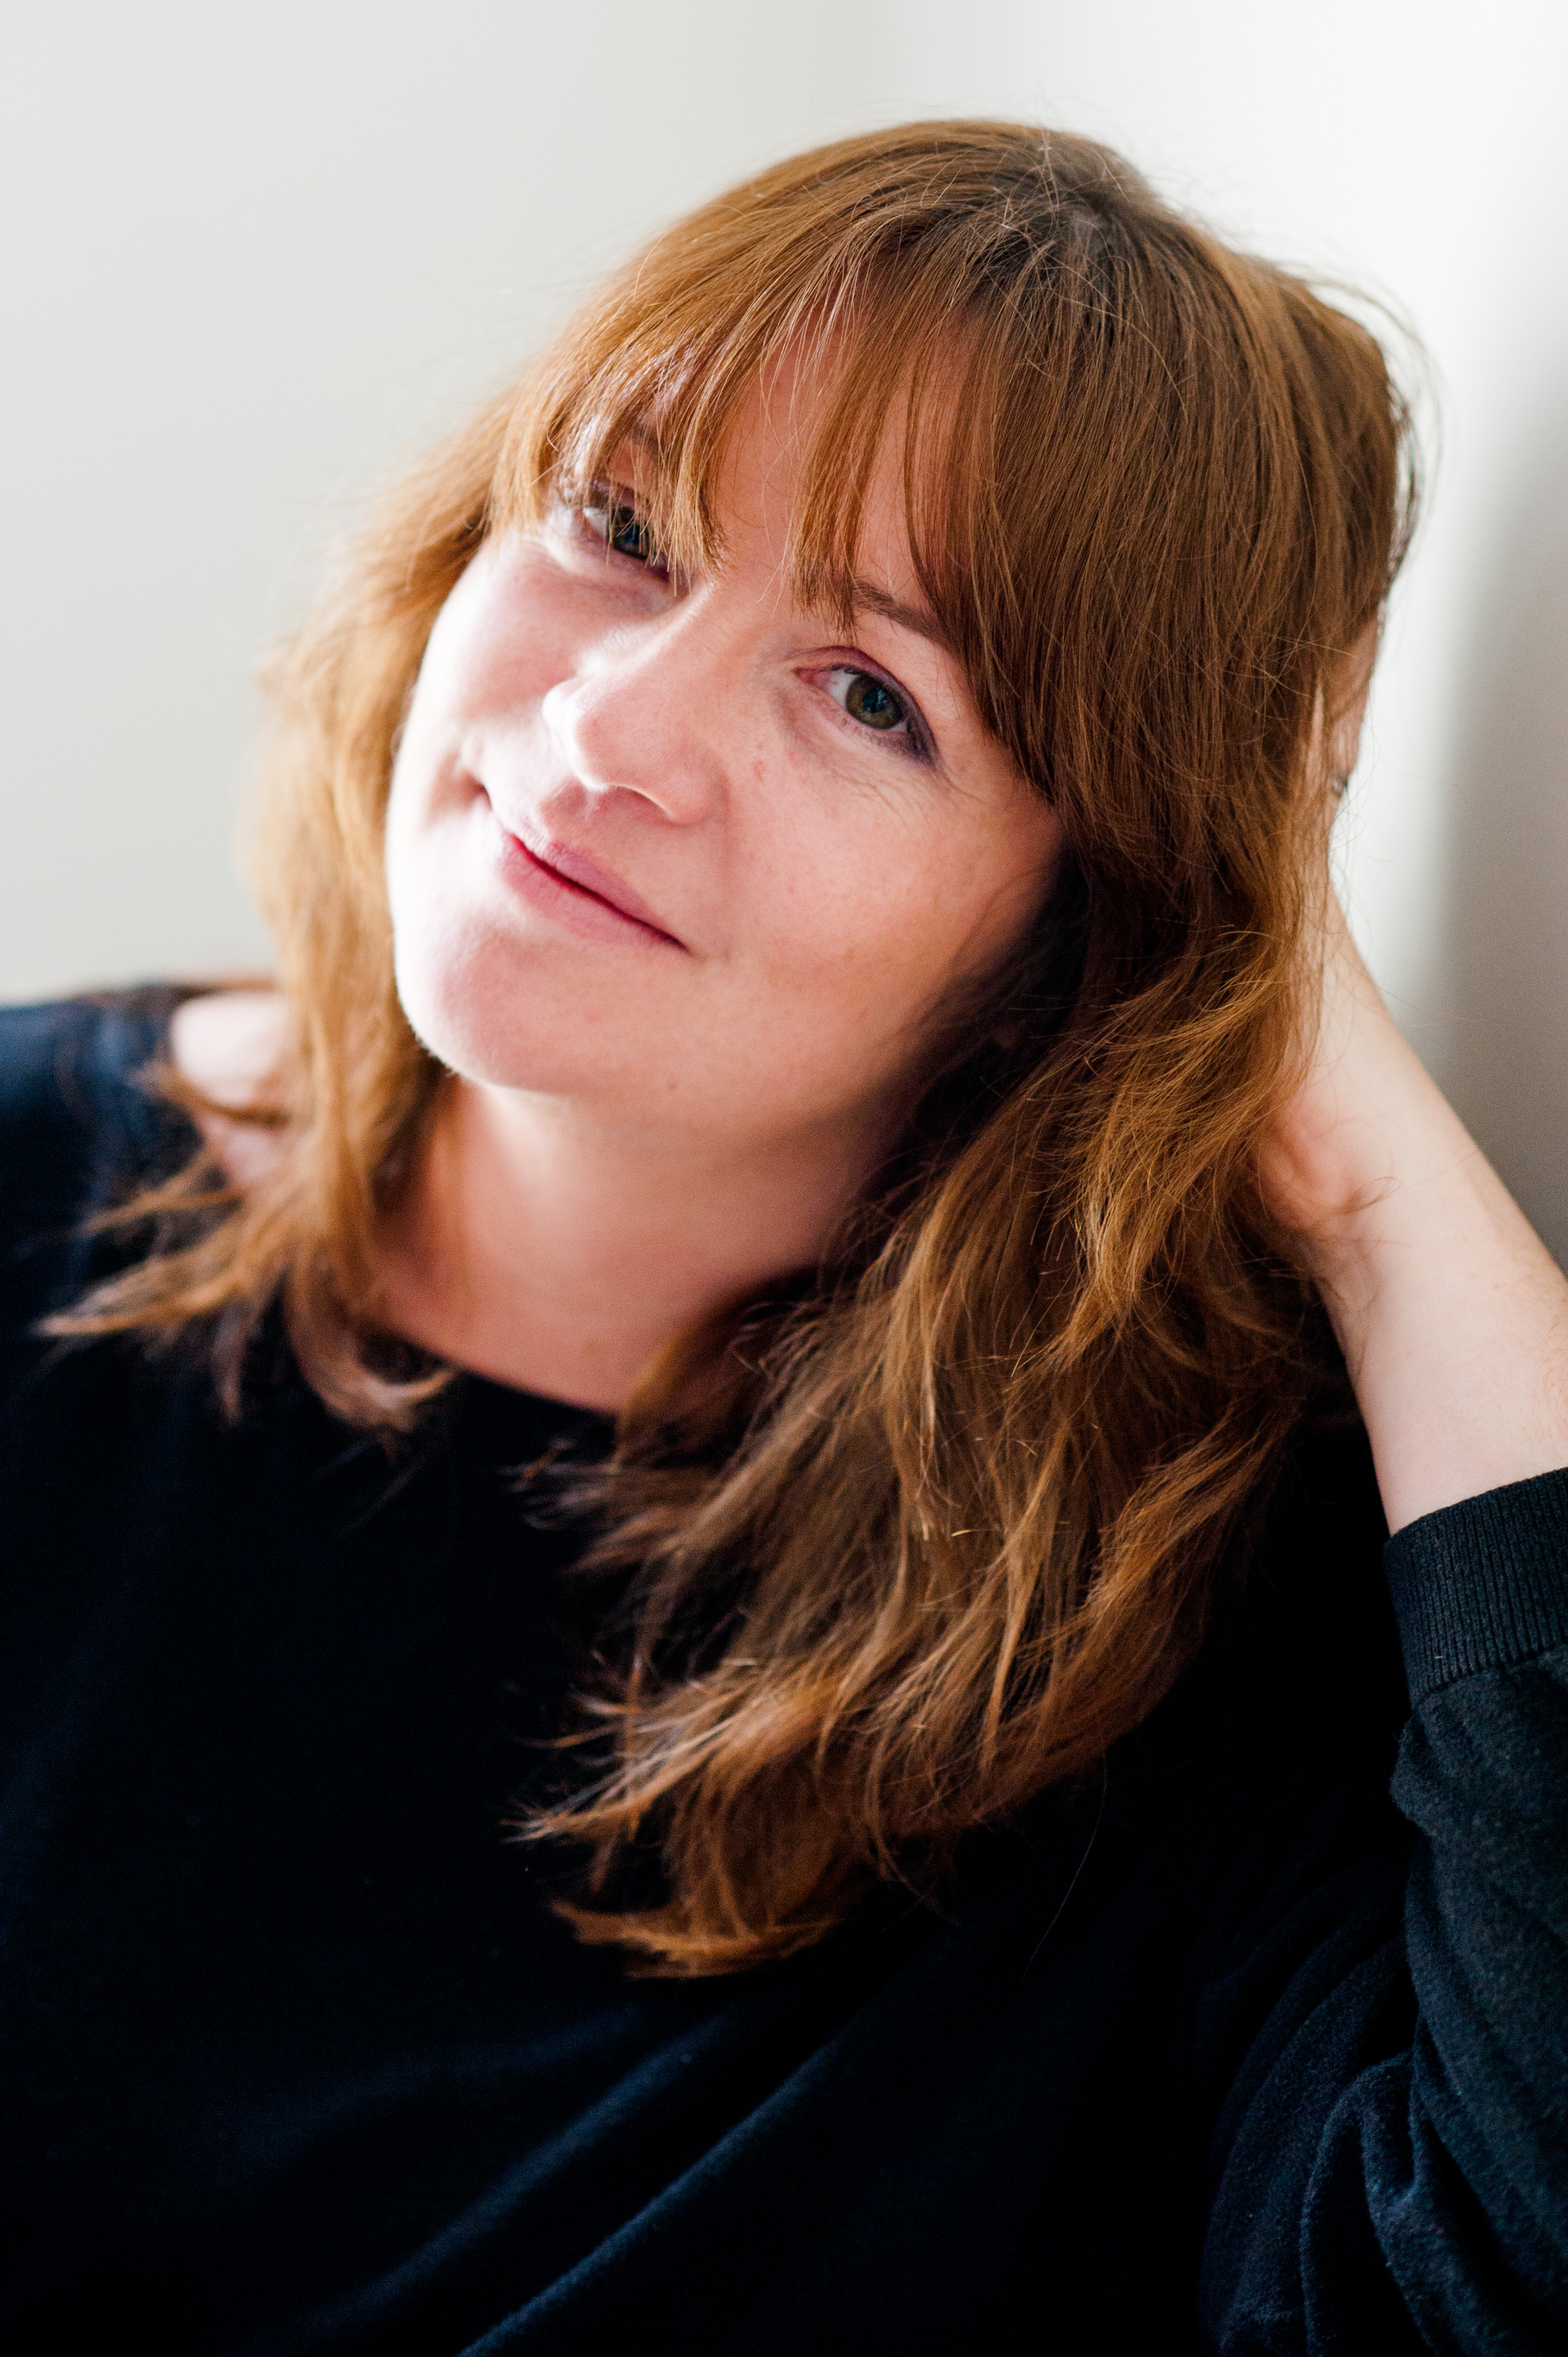 Eimear McBride to read at UCC